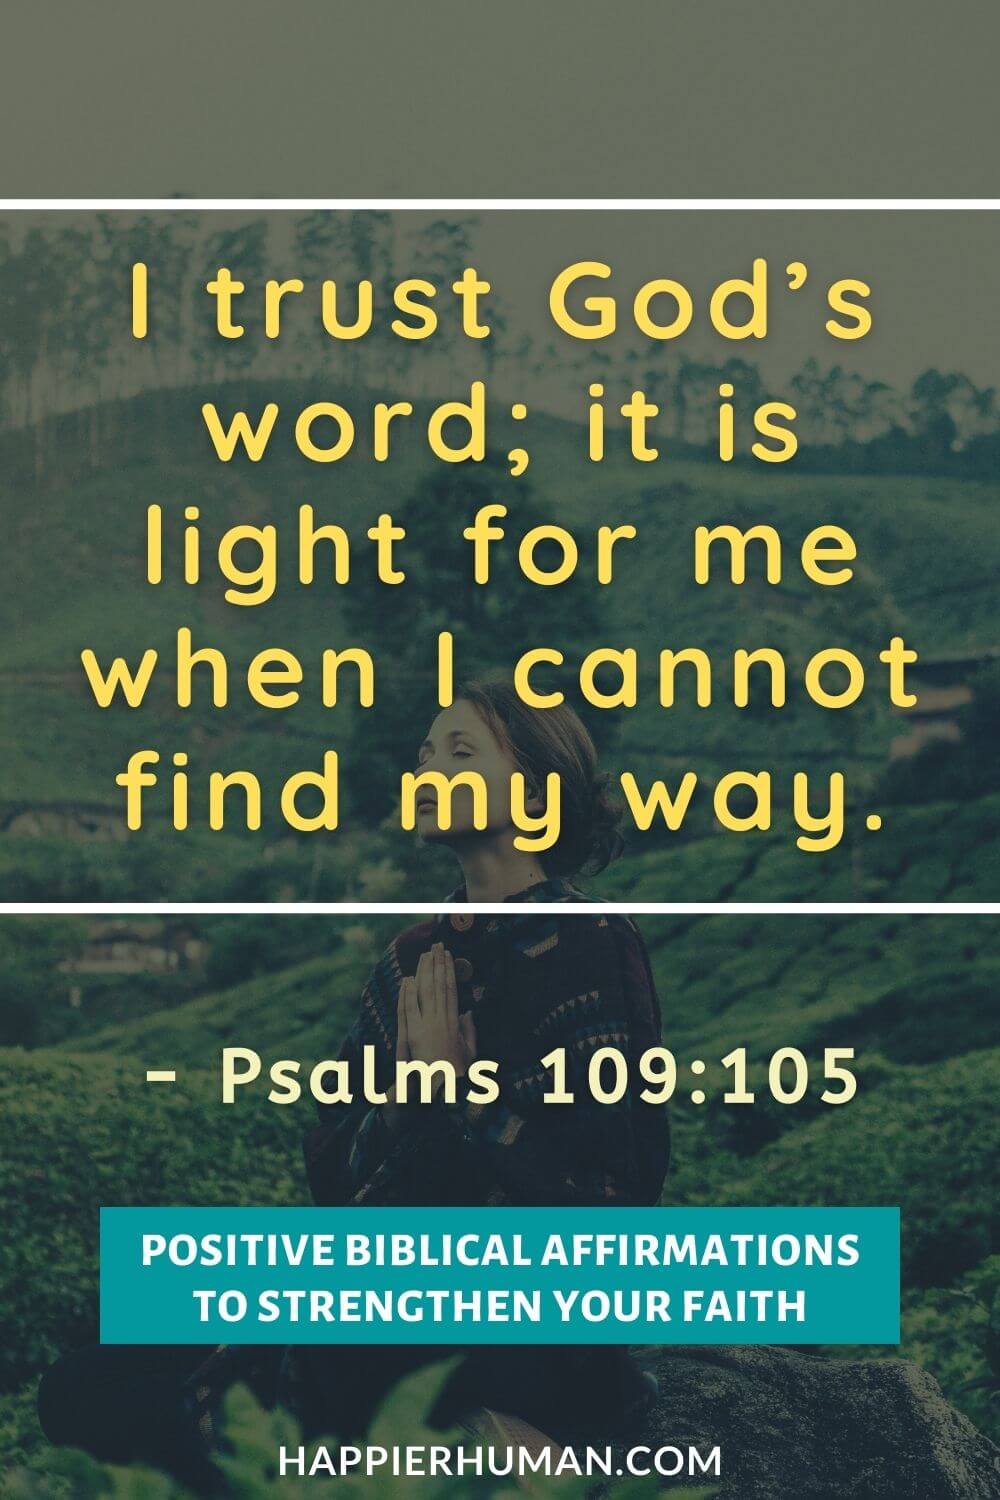 Biblical Affirmations - I trust God’s word; it is light for me when I cannot find my way. - Psalms 109:105 | i am affirmations from the bible pdf | biblical affirmations for kids | biblical affirmations for family